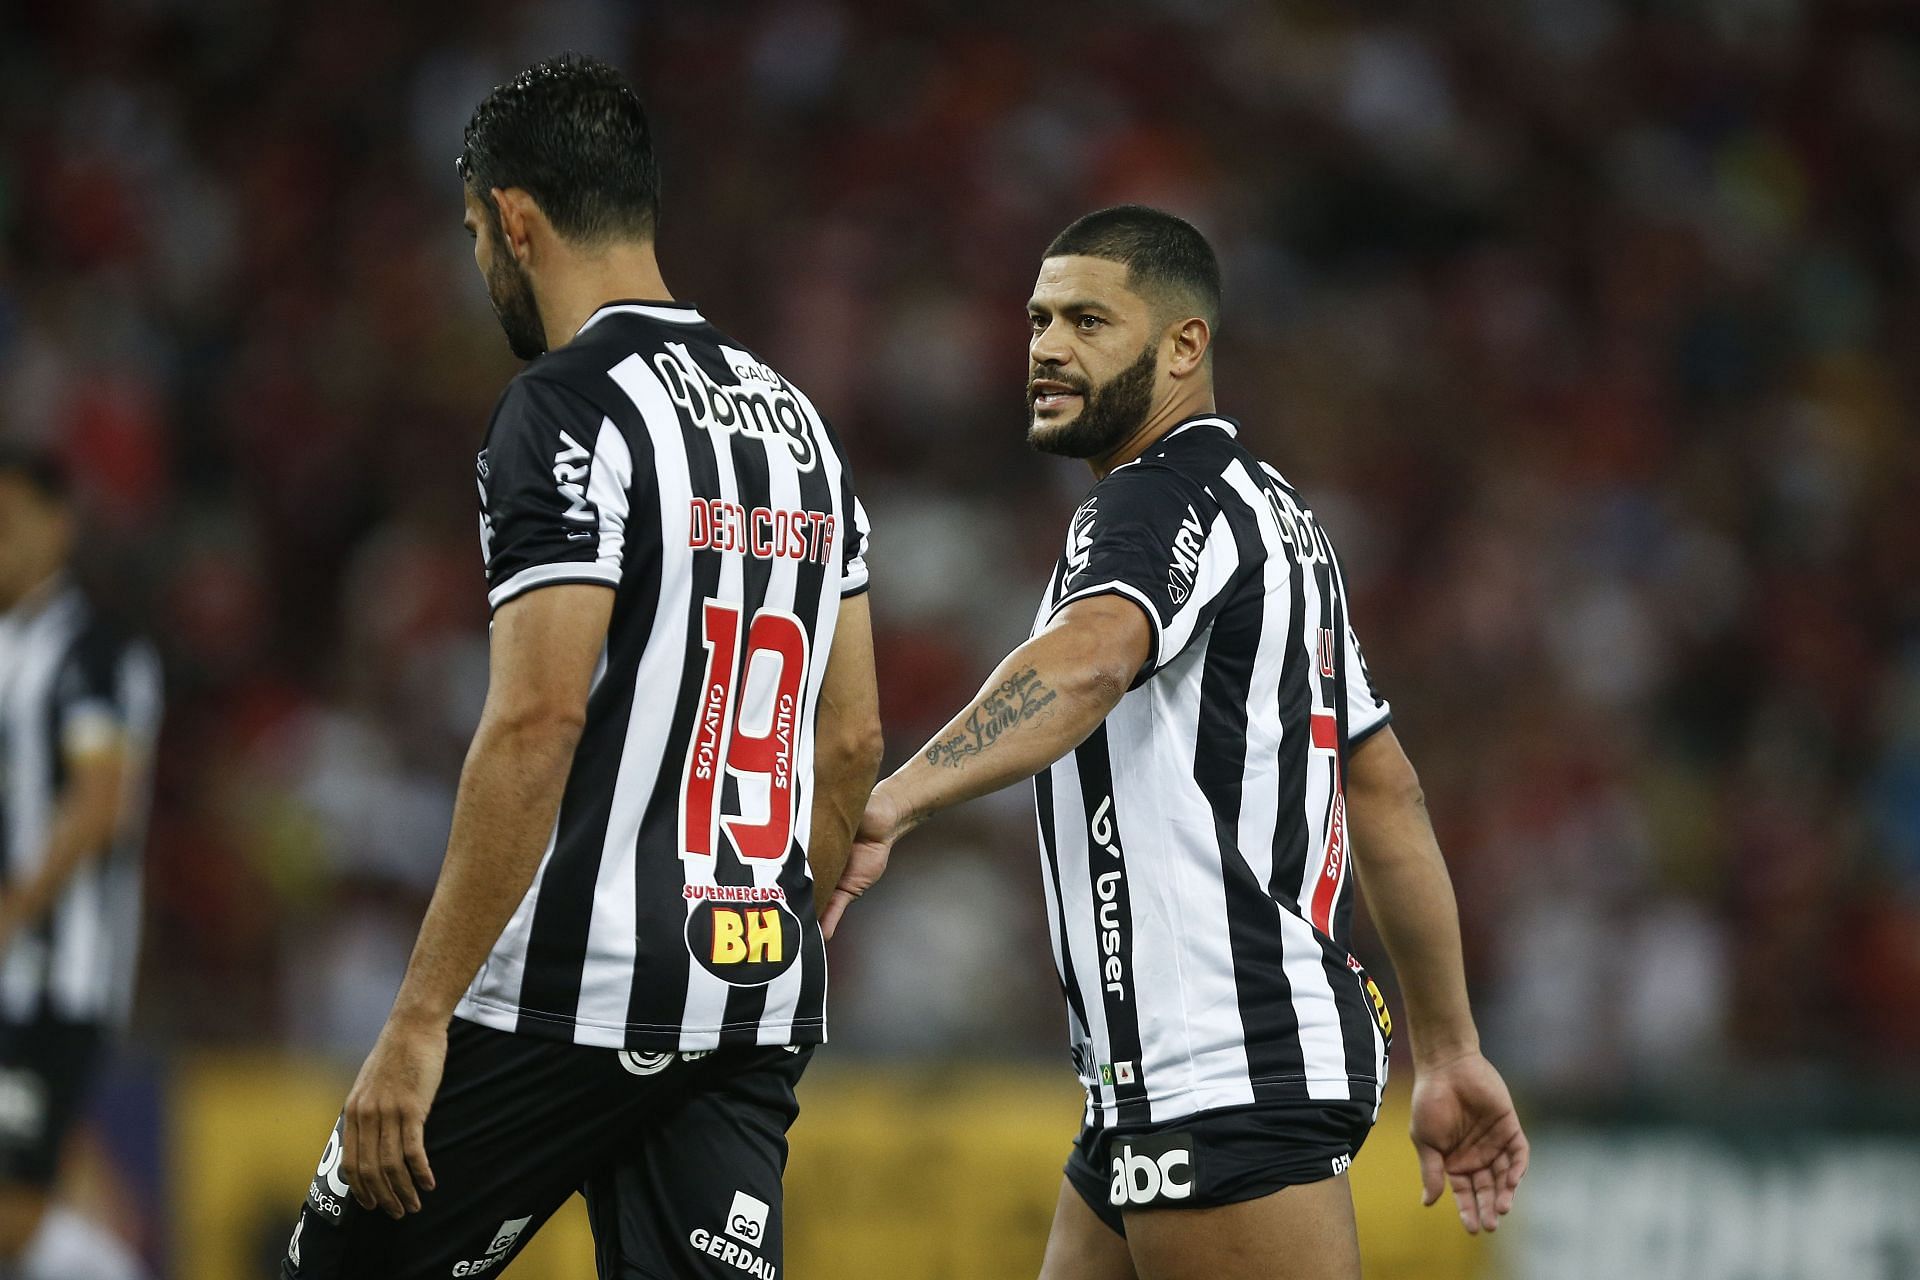 Atletico Mineiro and Flamengo square off in the Supercopa do Brasil on Sunday